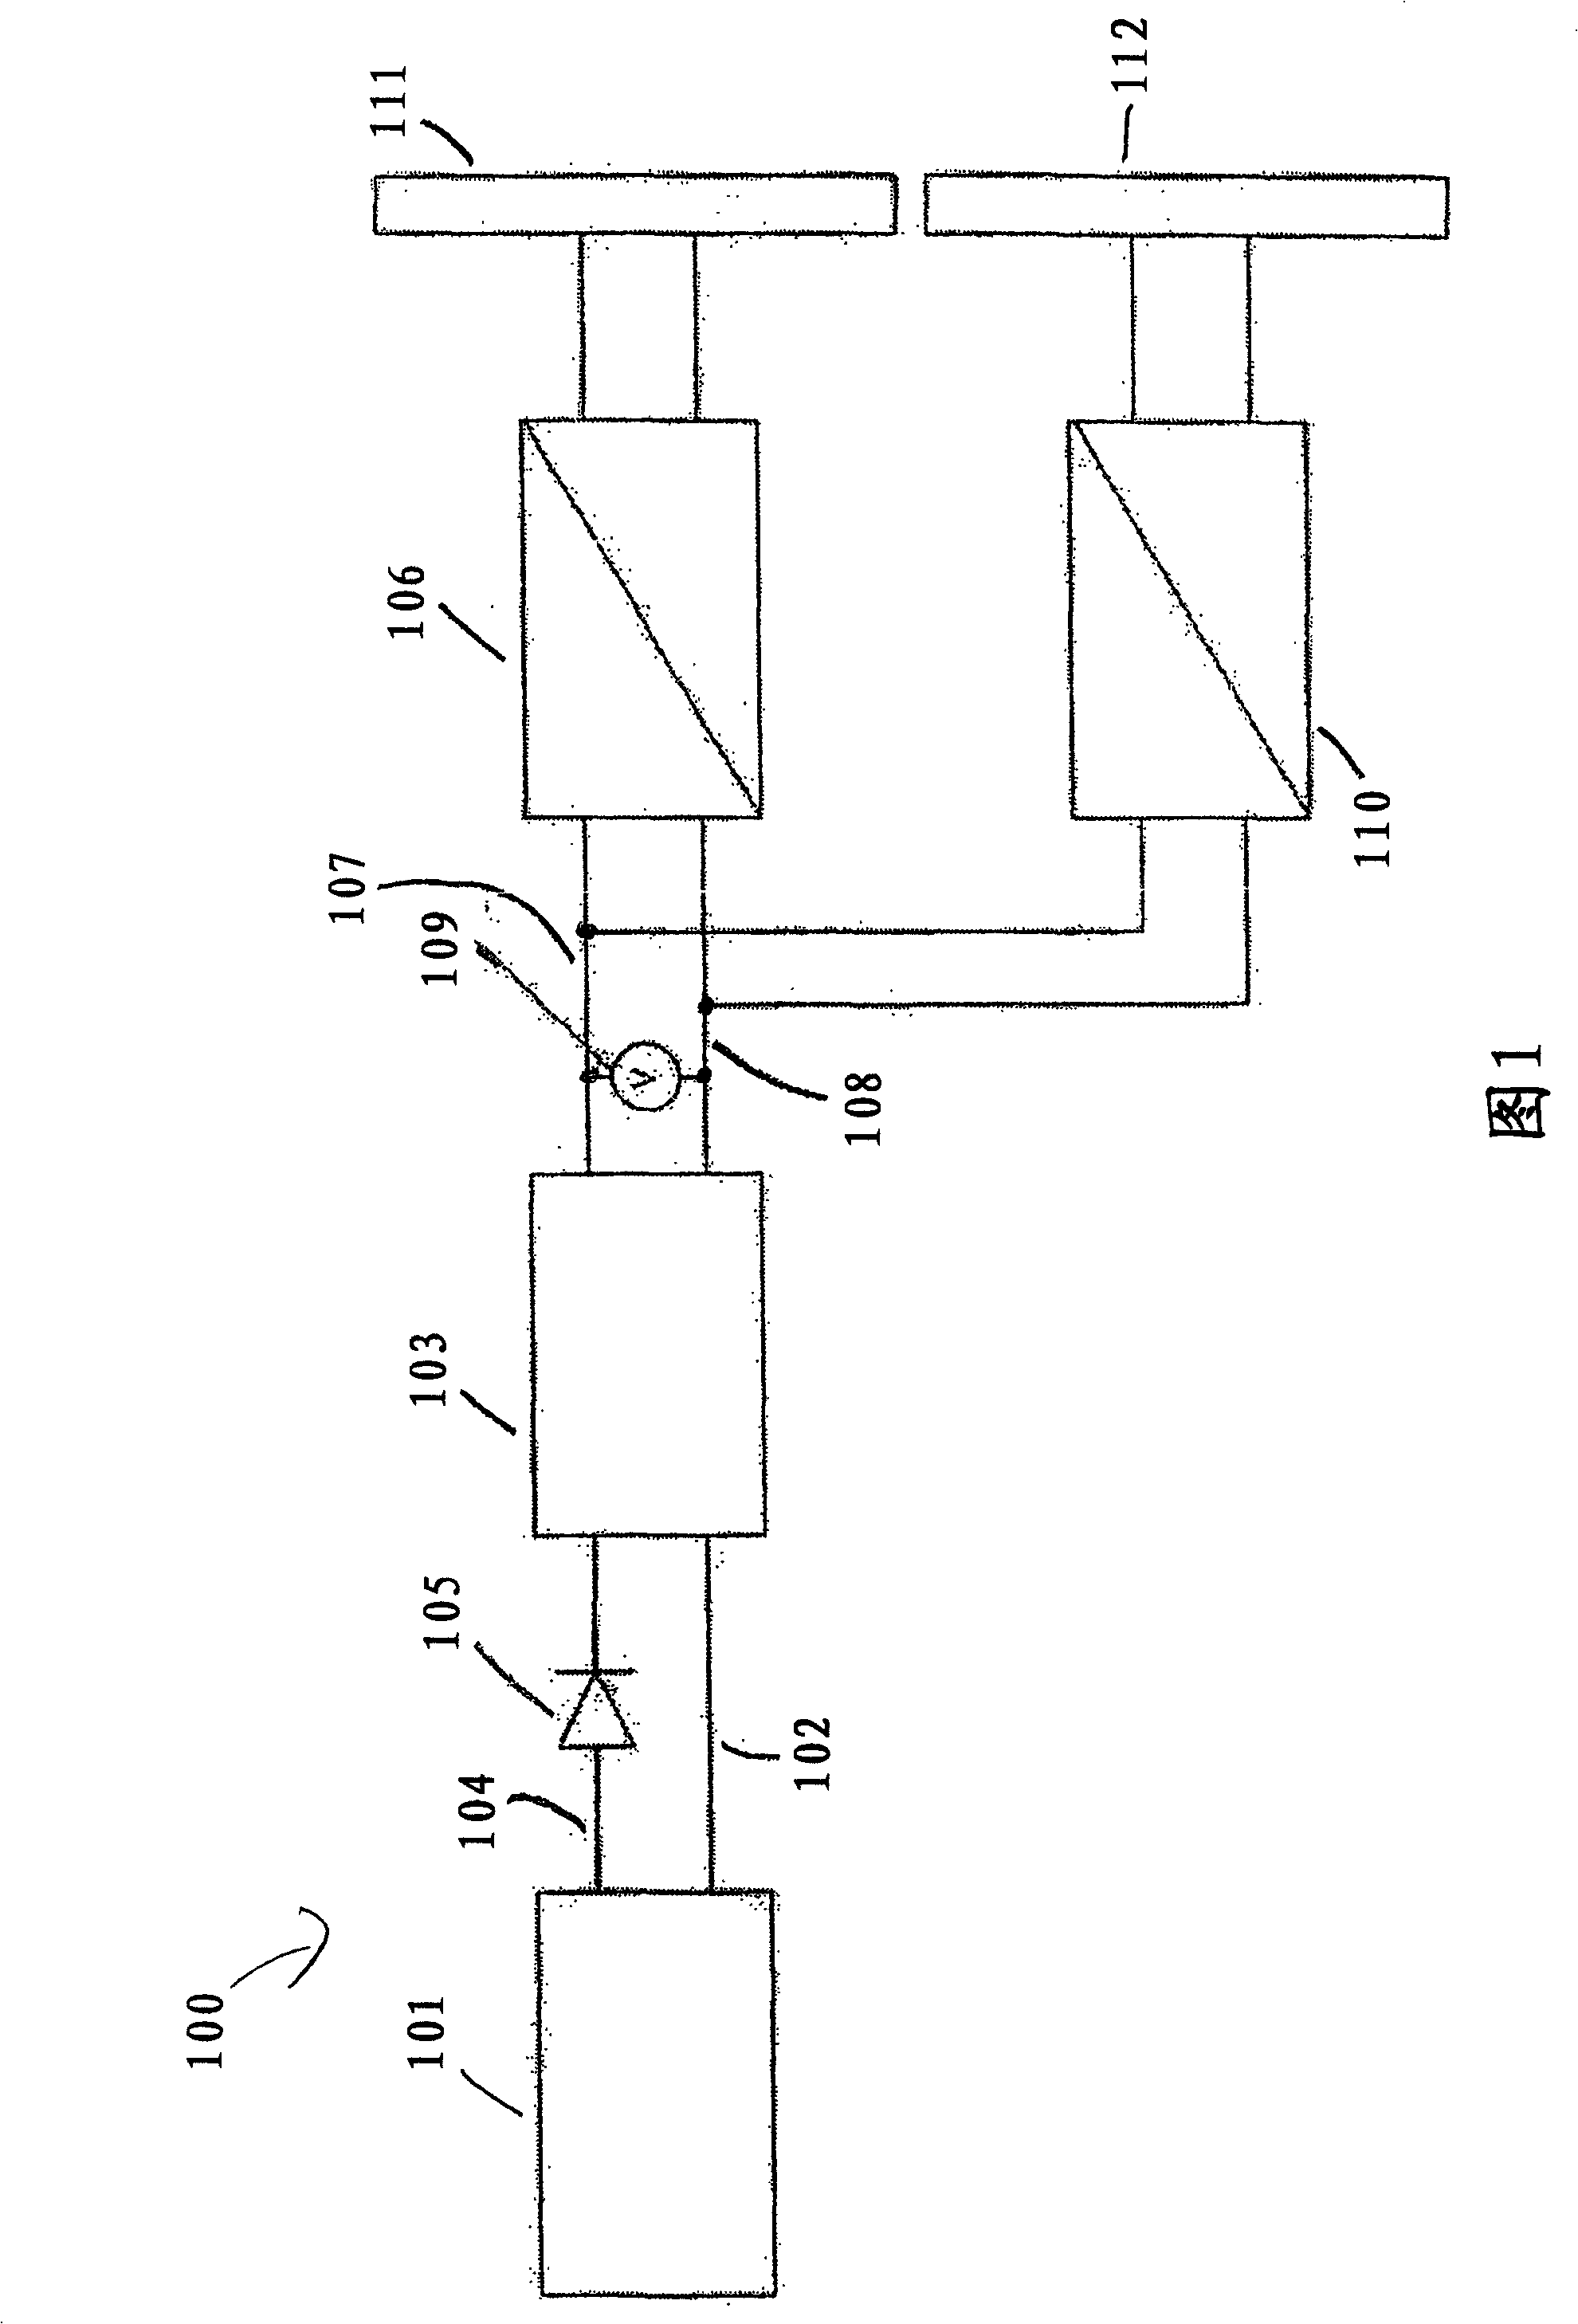 Energy supply system for supplying energy to aircraft systems